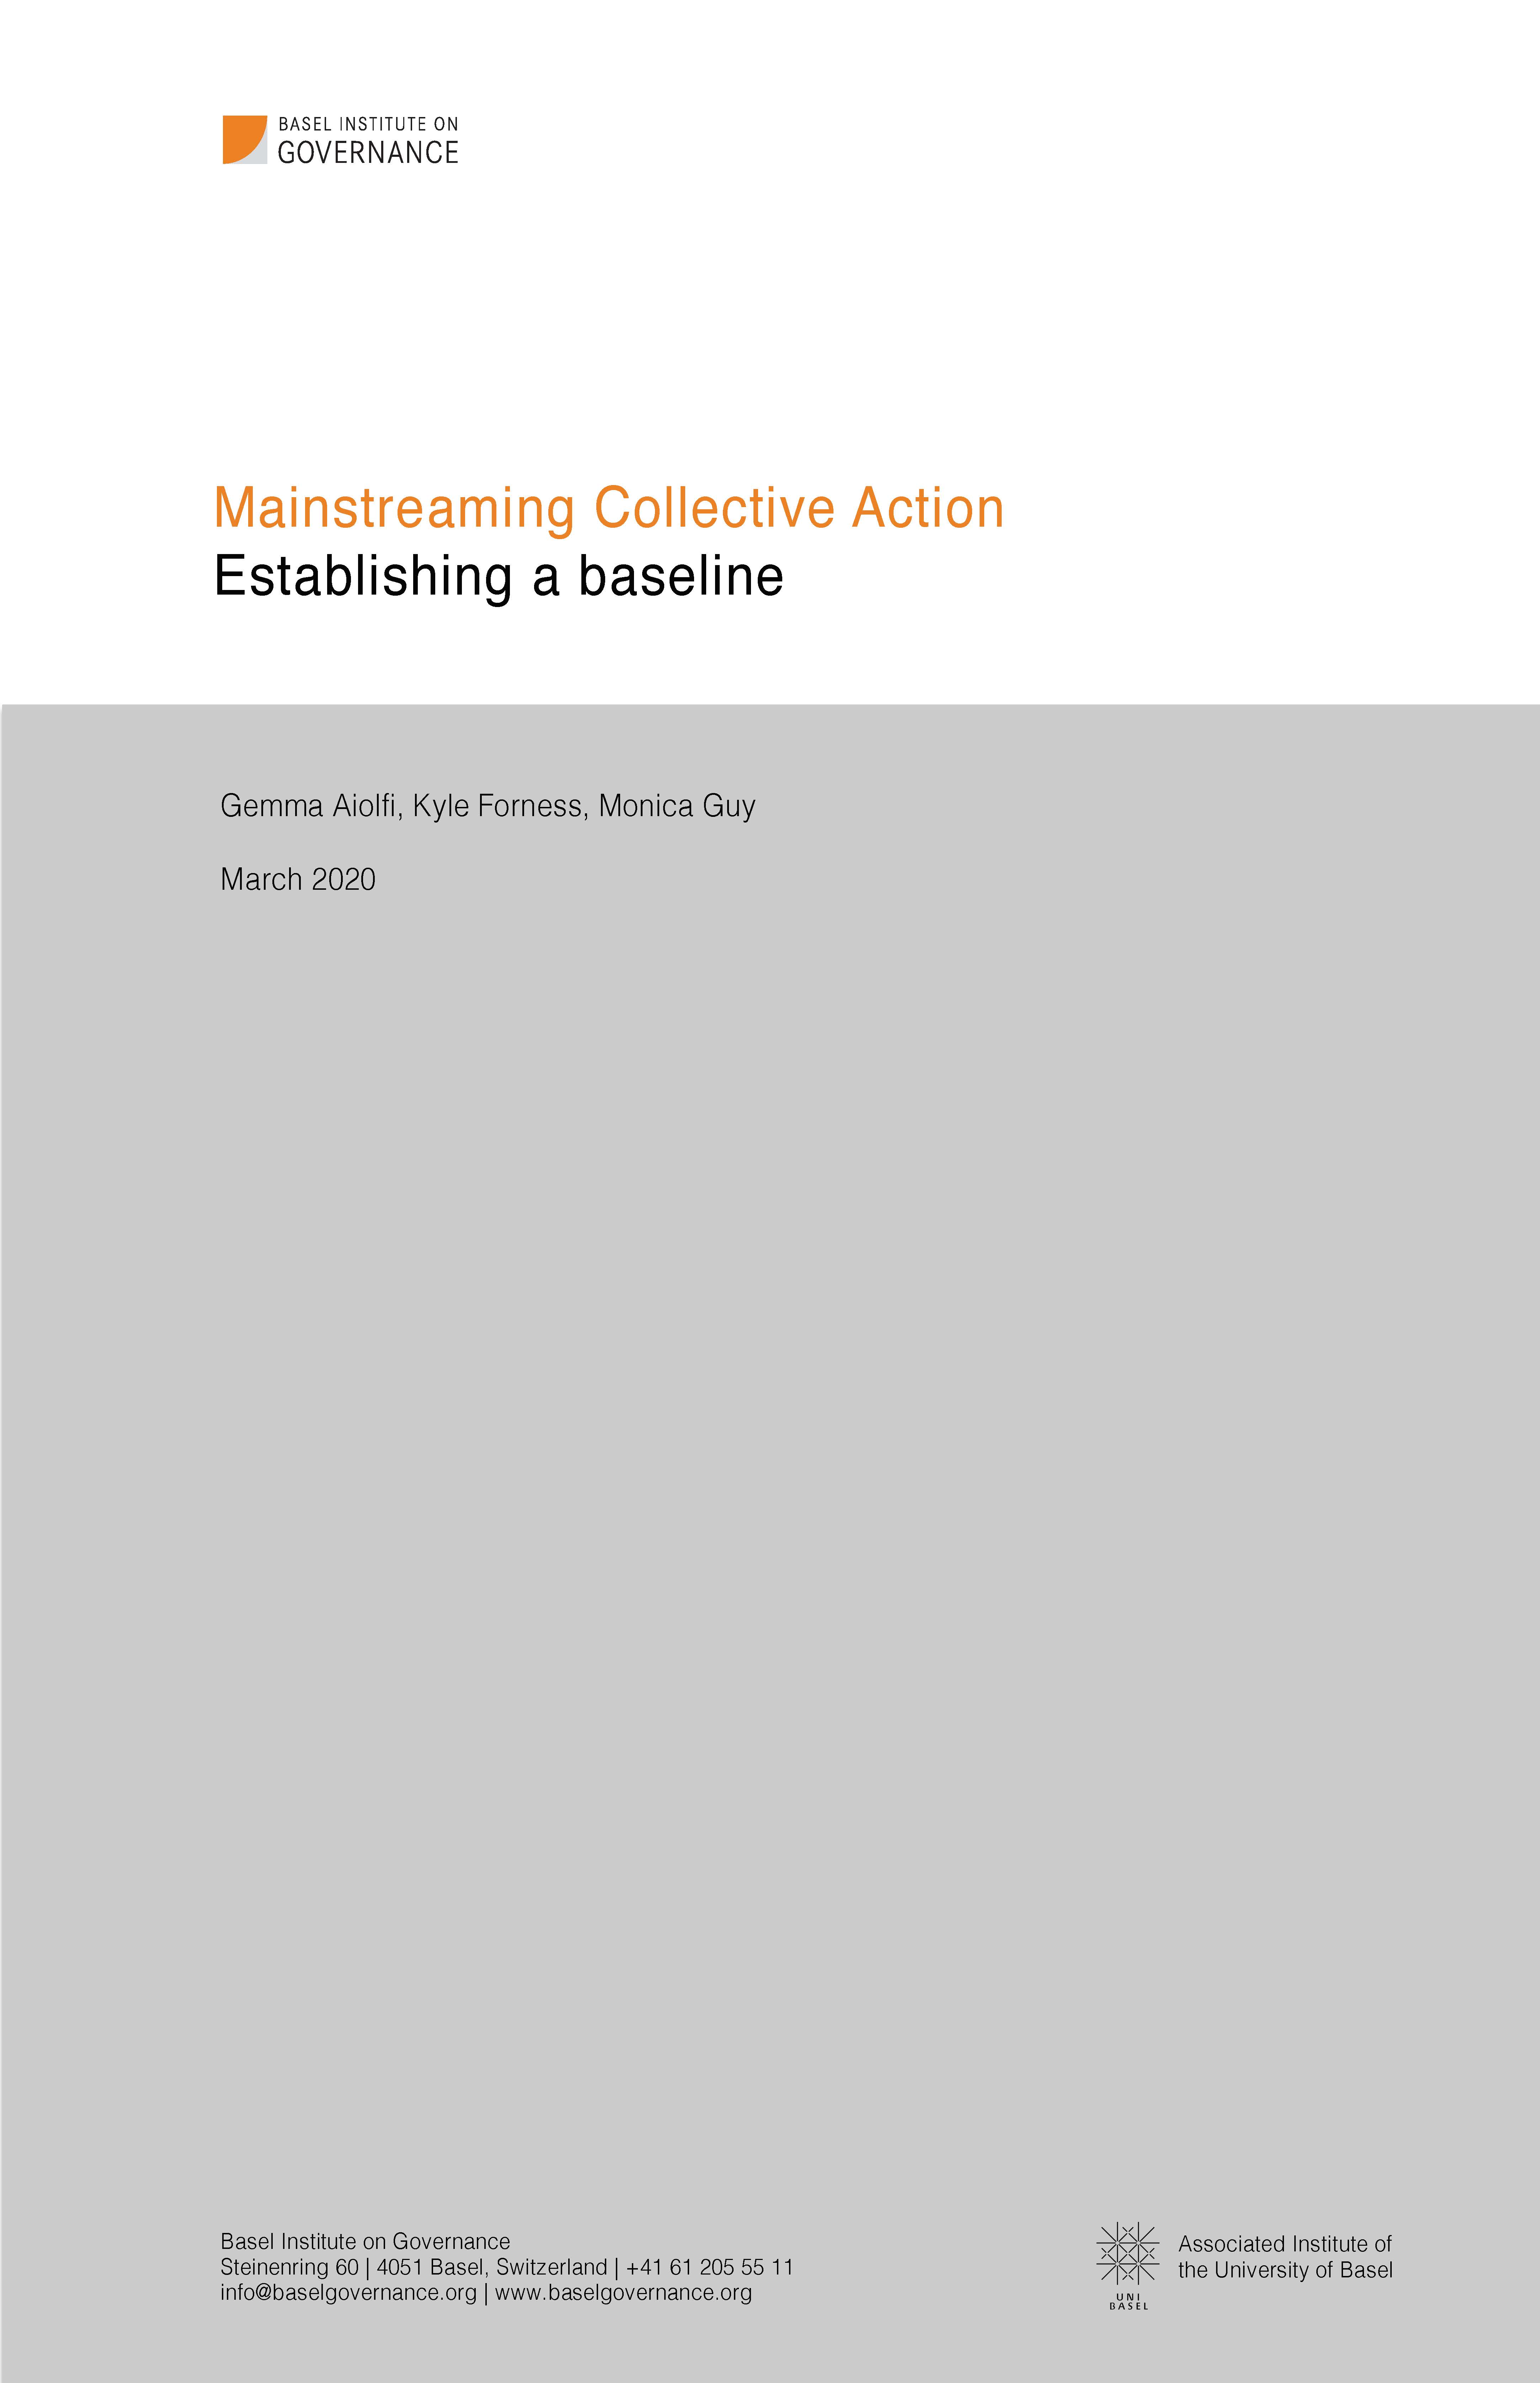 Cover page of Collective Action as a Norm Baseline Report